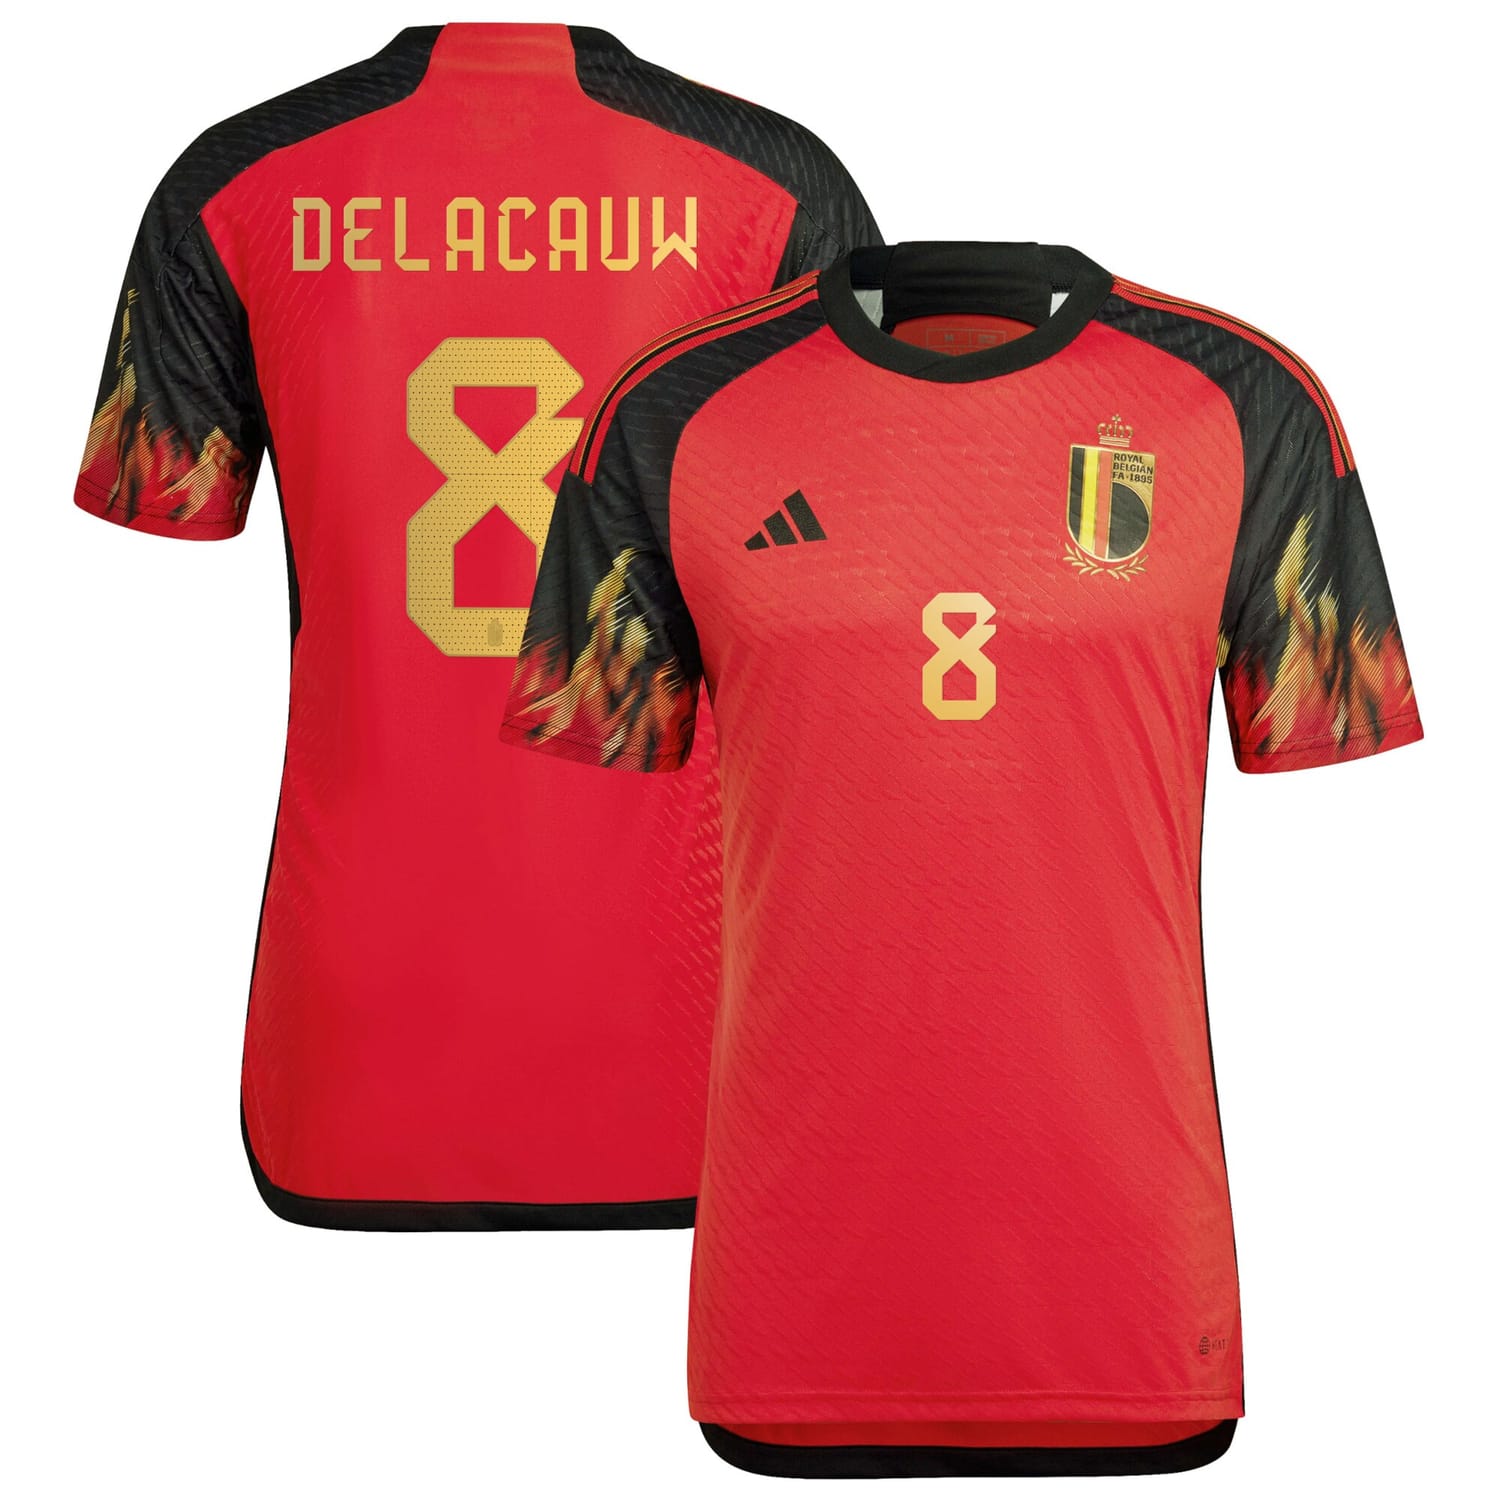 Belgium National Team Home Authentic Jersey Shirt 2022 player Féli Delacauw 8 printing for Men